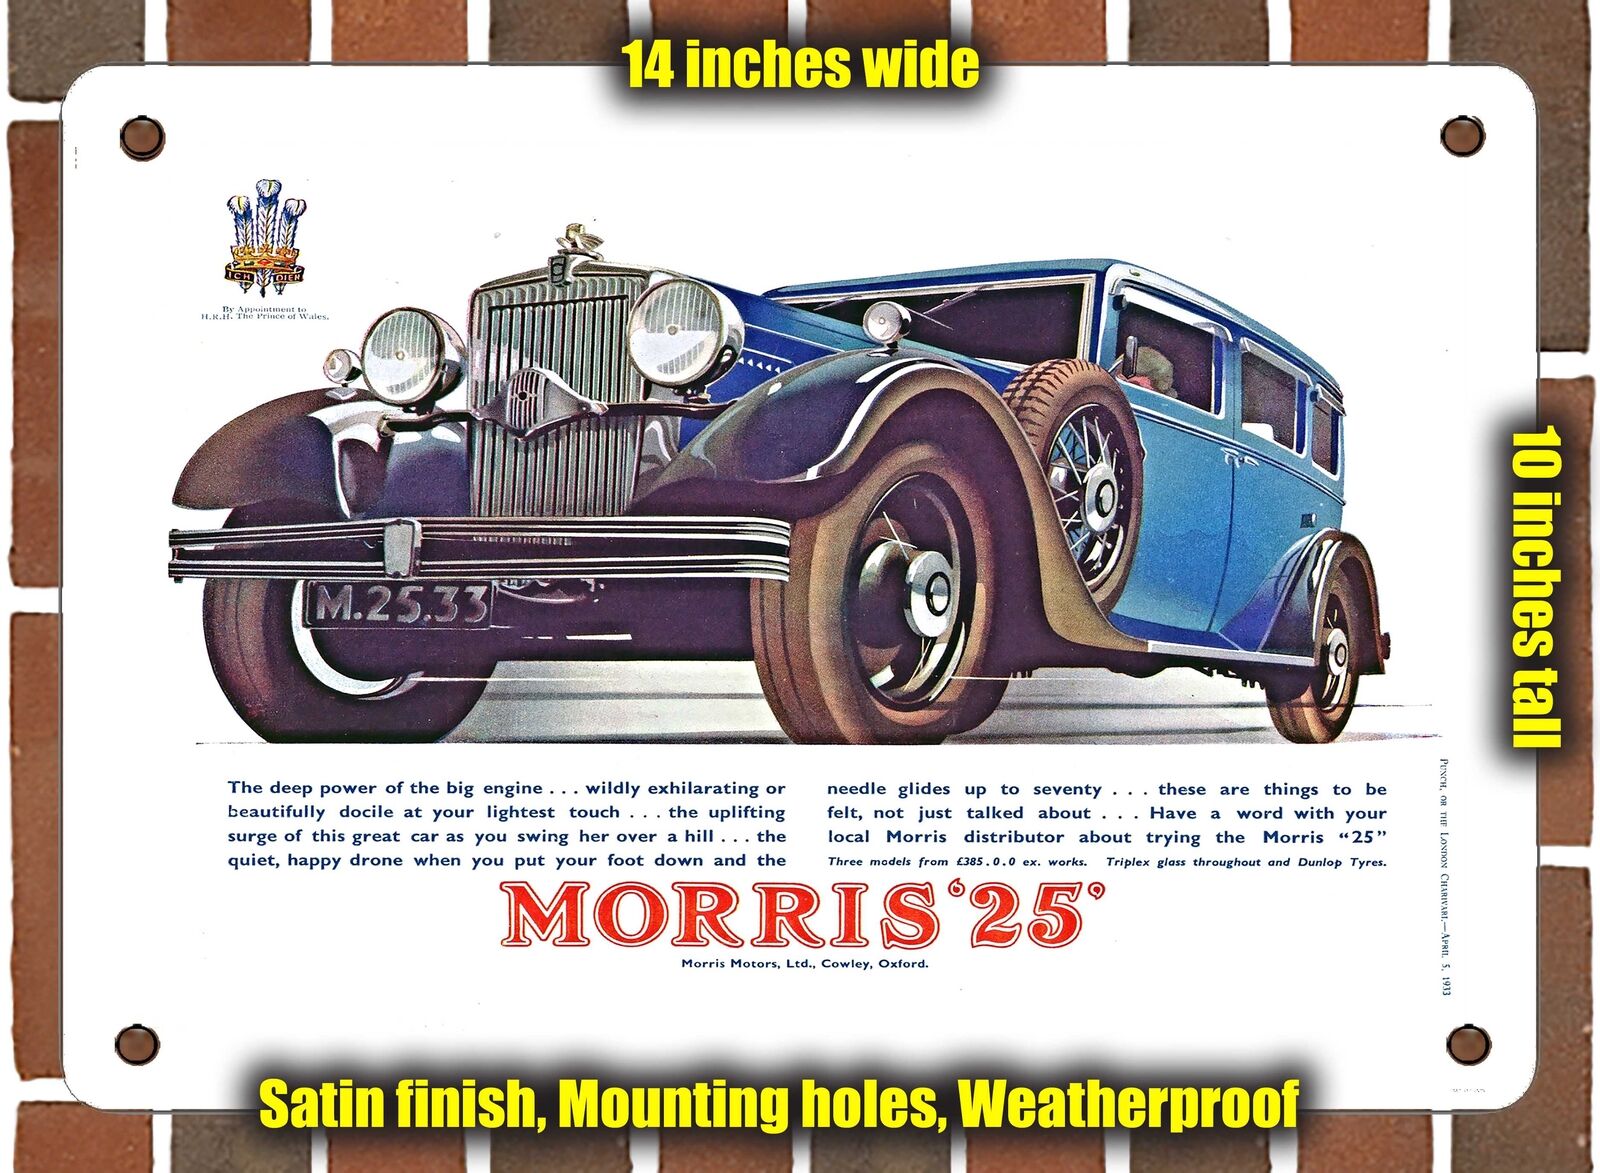 METAL SIGN - 1933 Morris 25 - 10x14 Inches